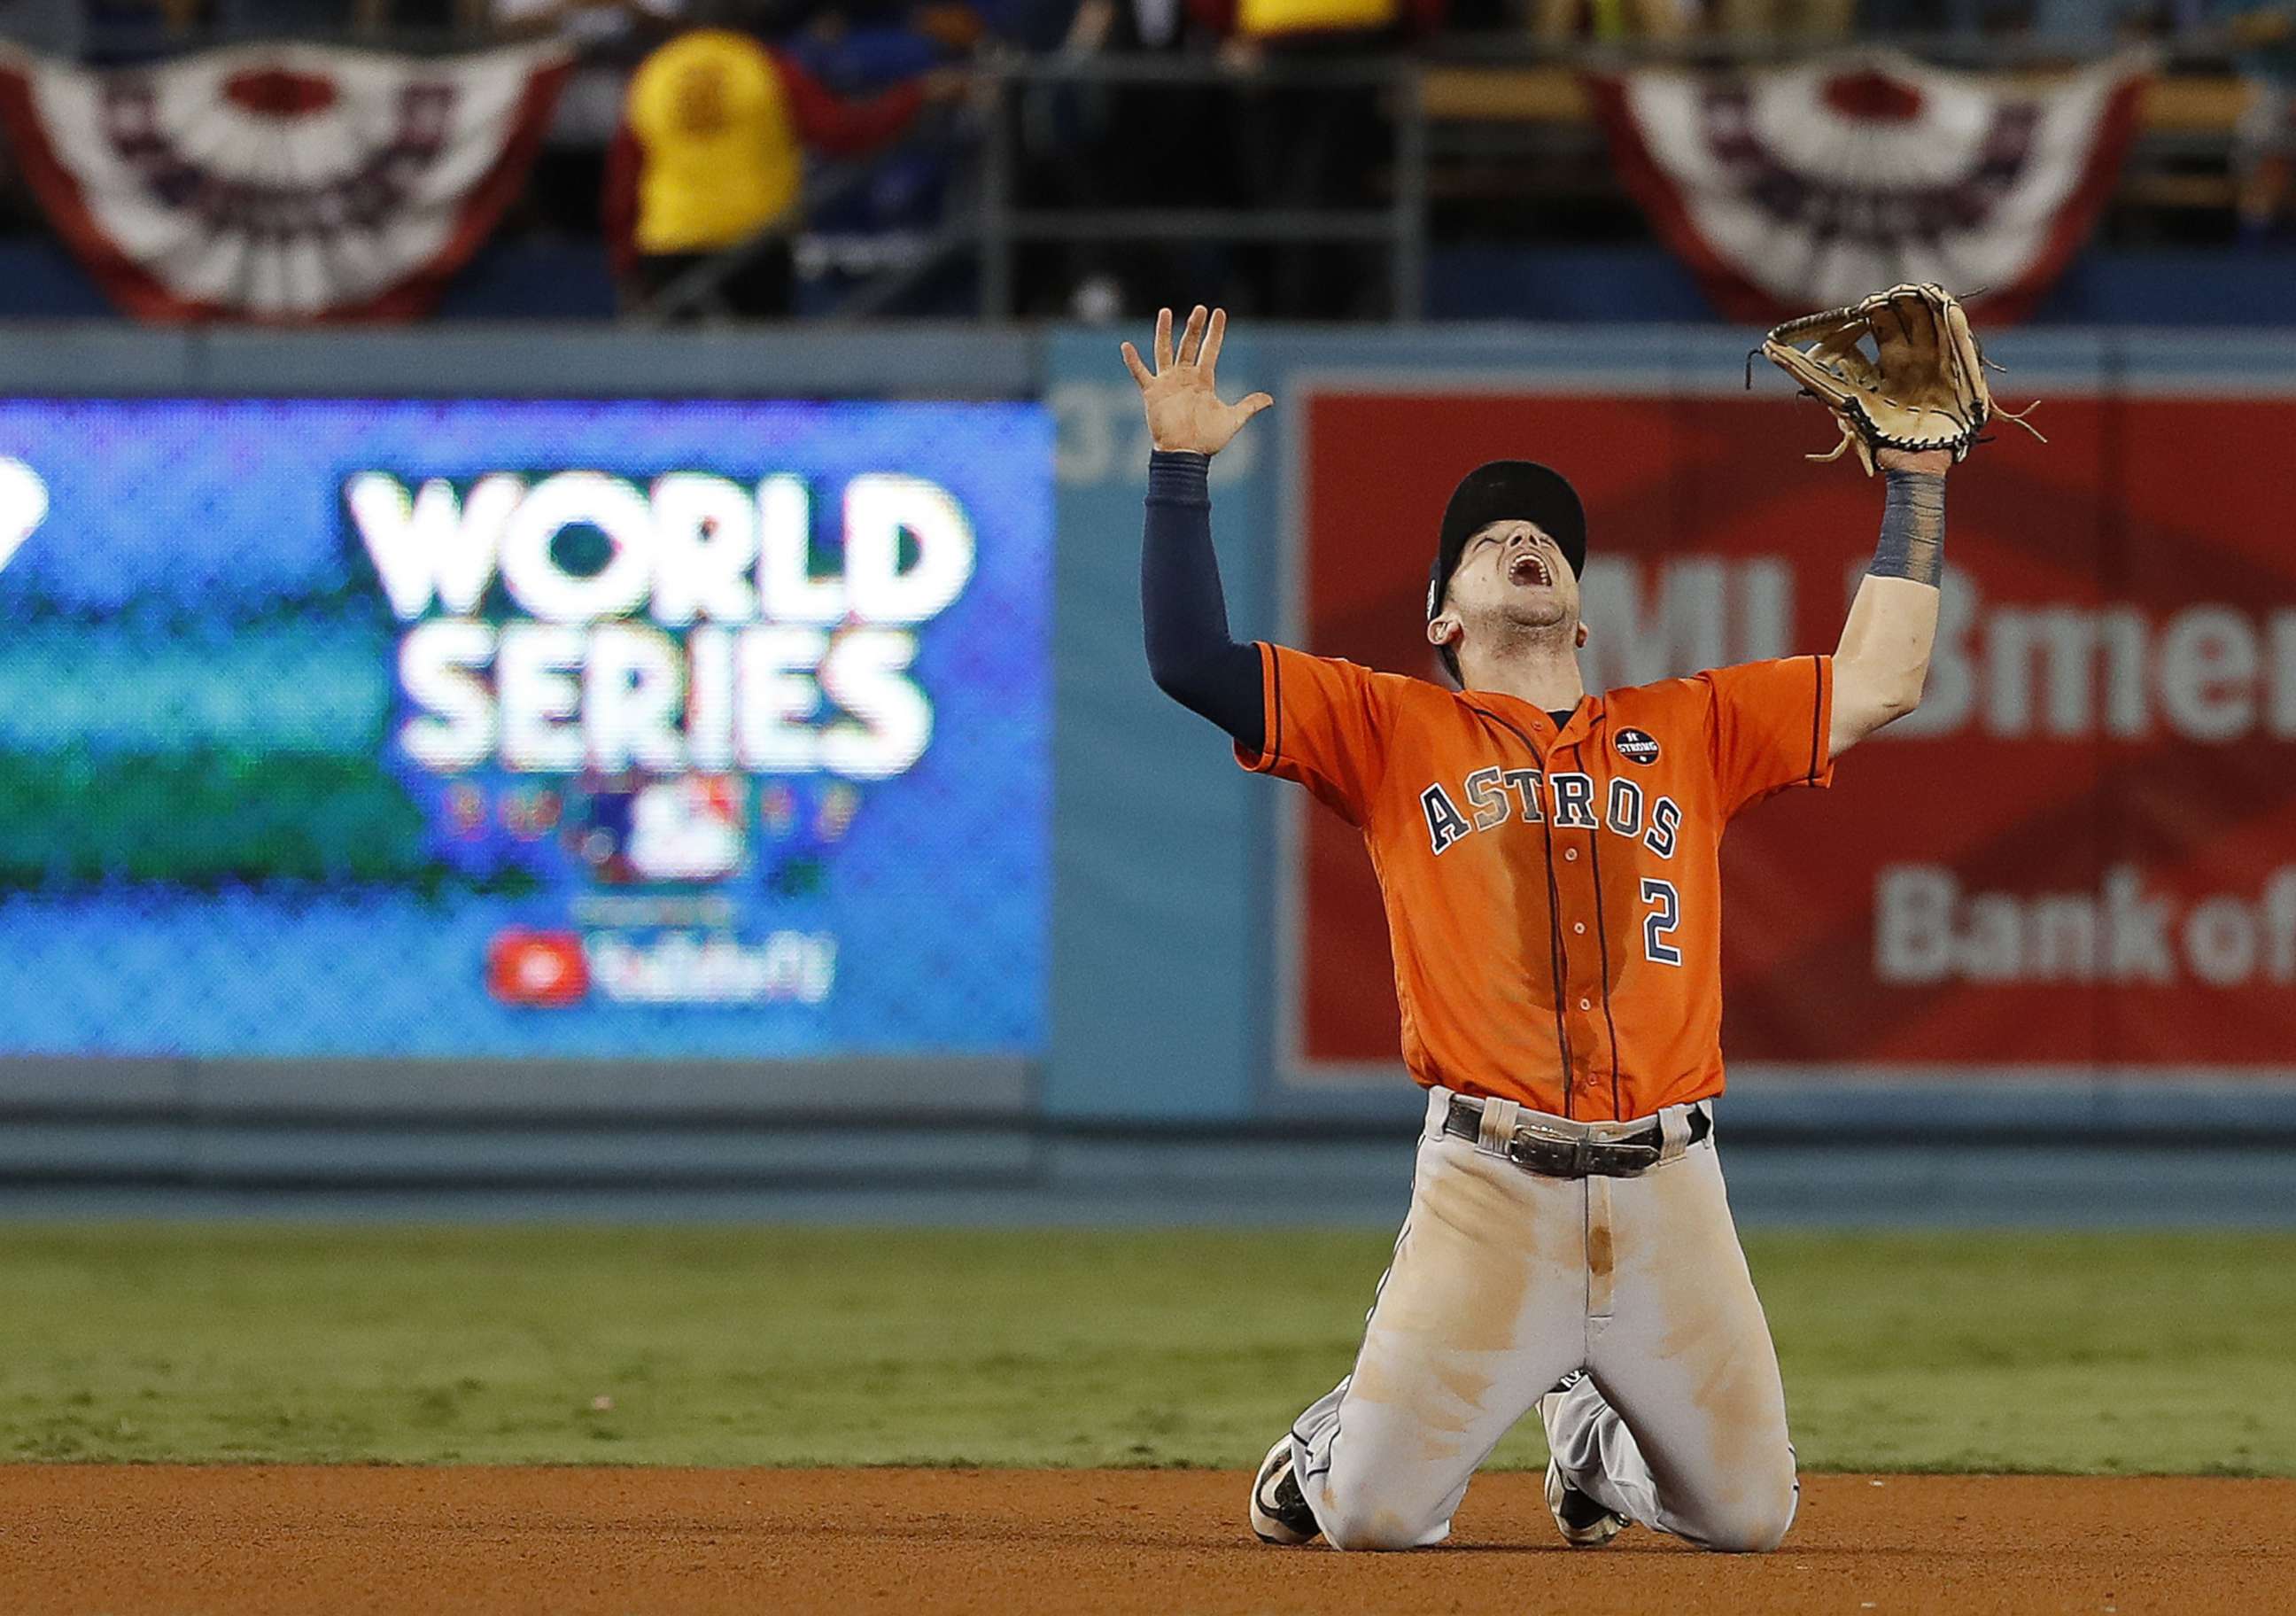 Houston Astros claim first World Series title in Game 7 win over